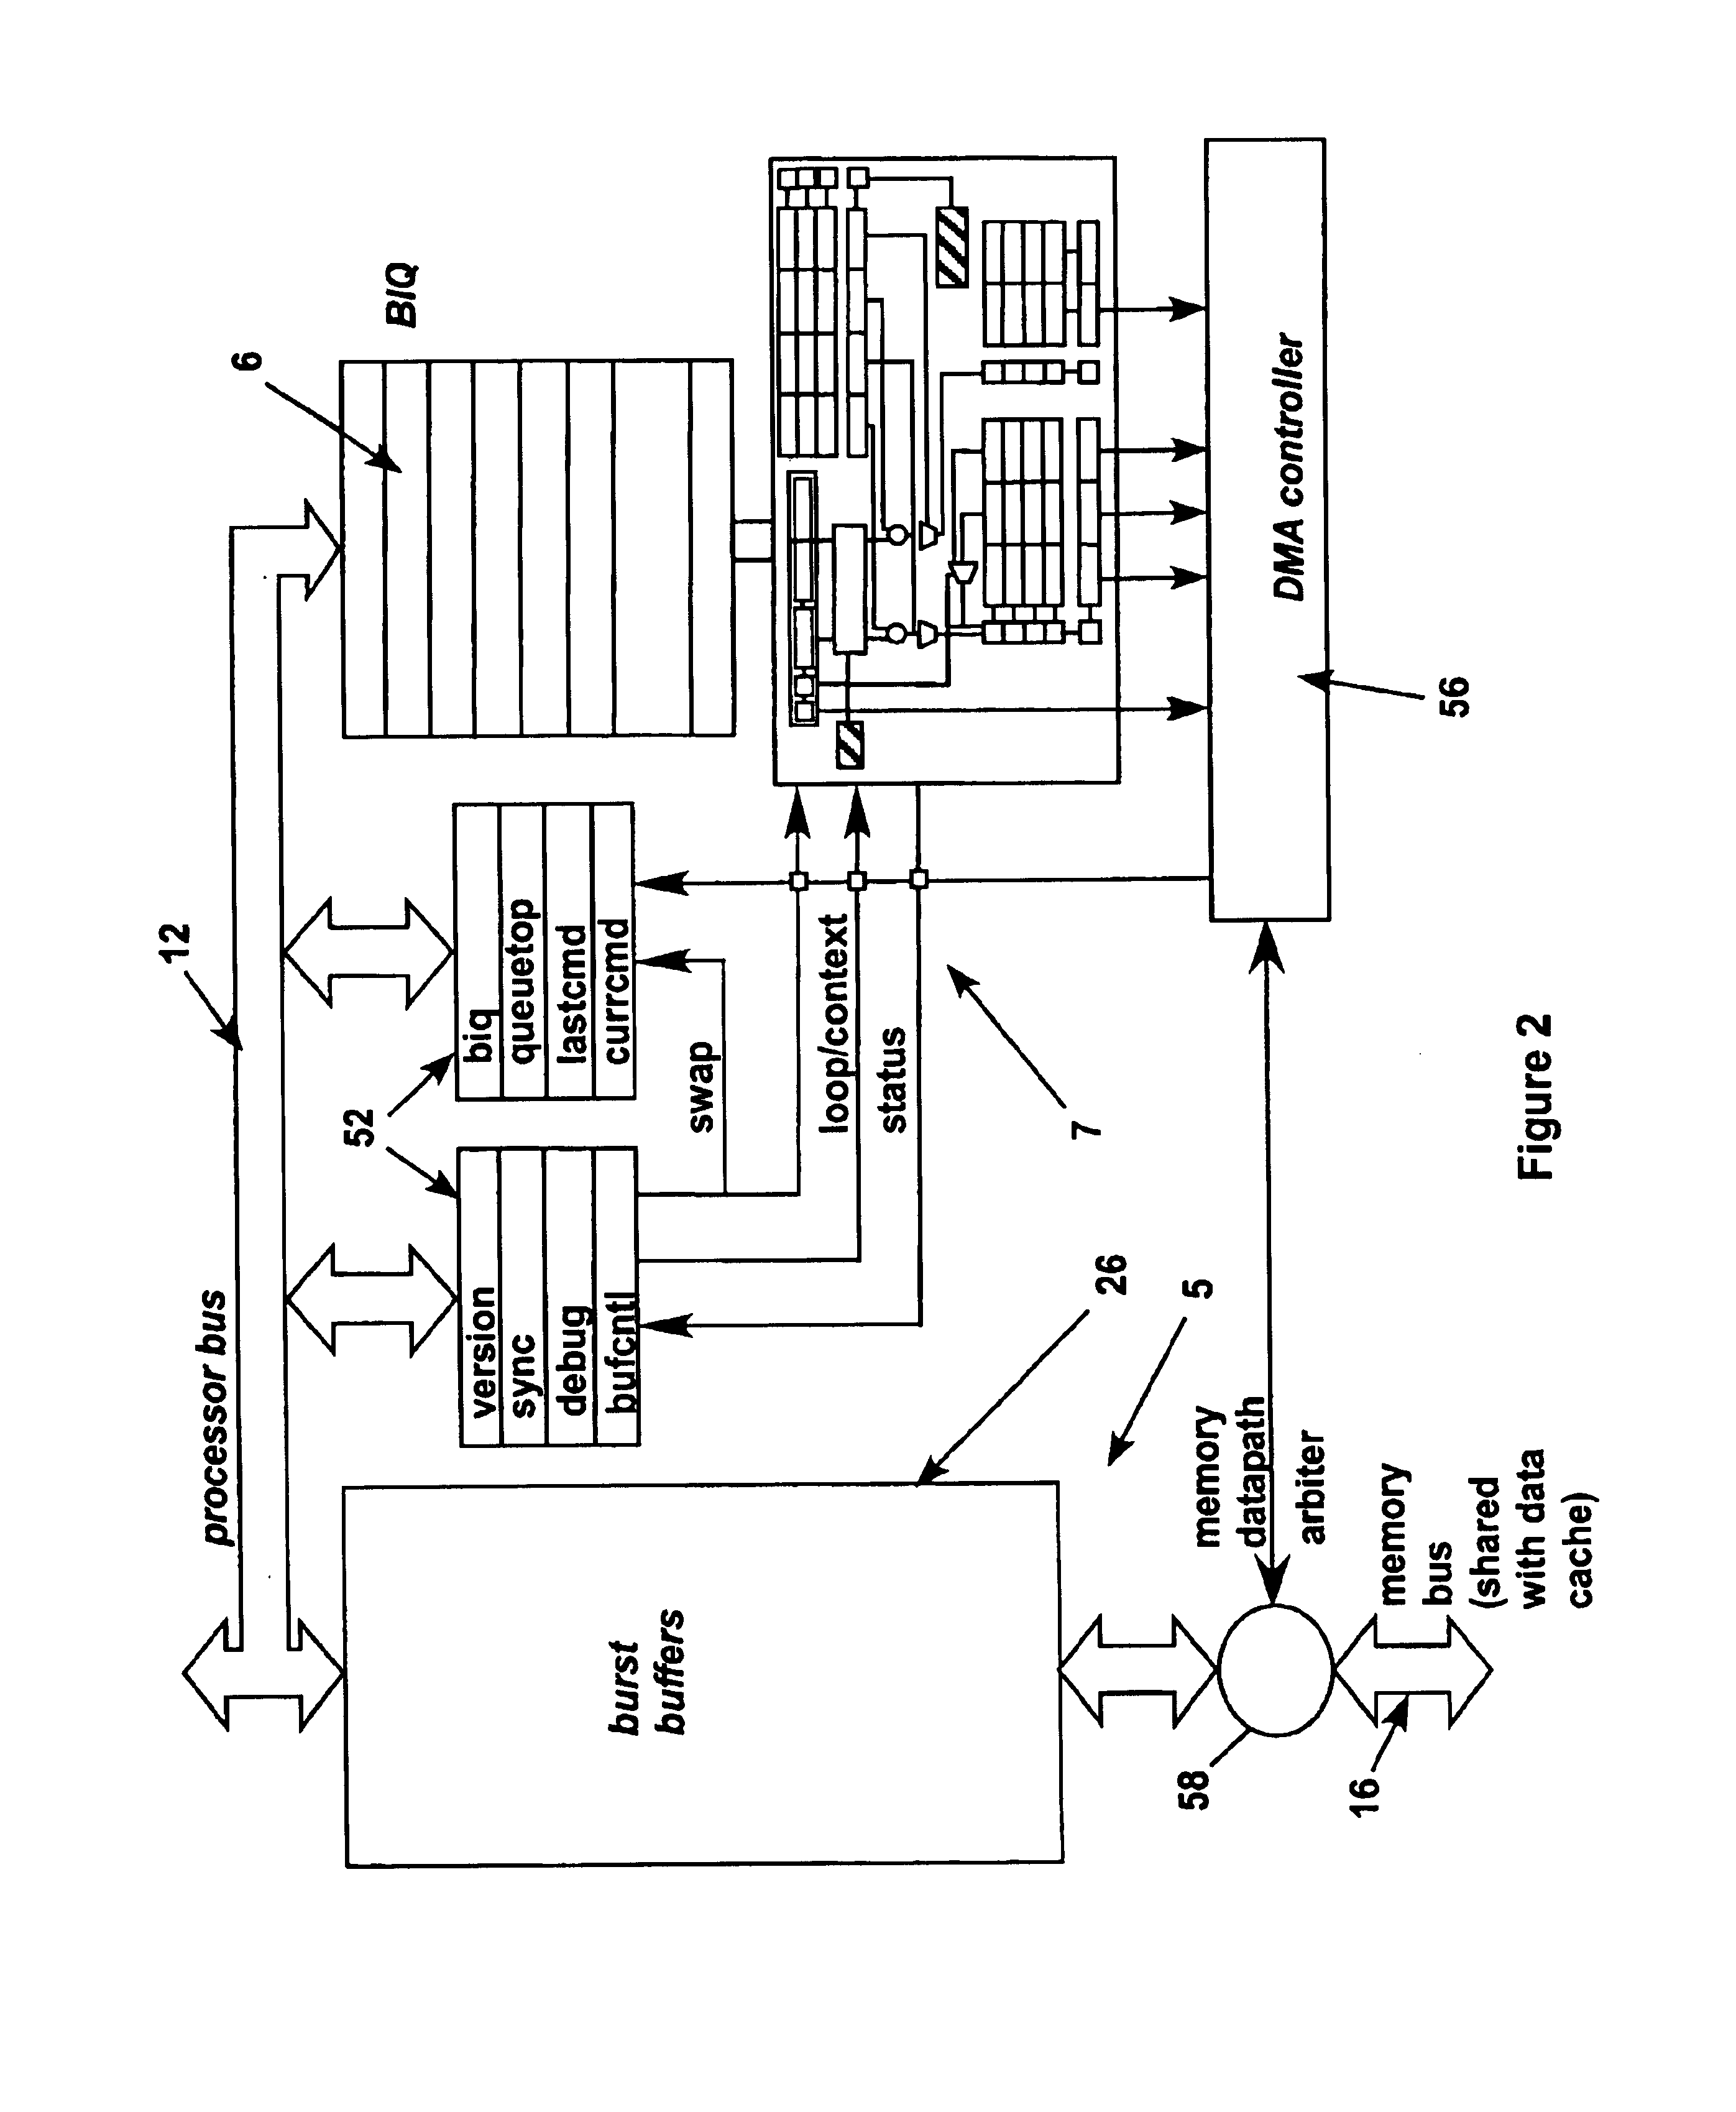 Memory and instructions in computer architecture containing processor and coprocessor